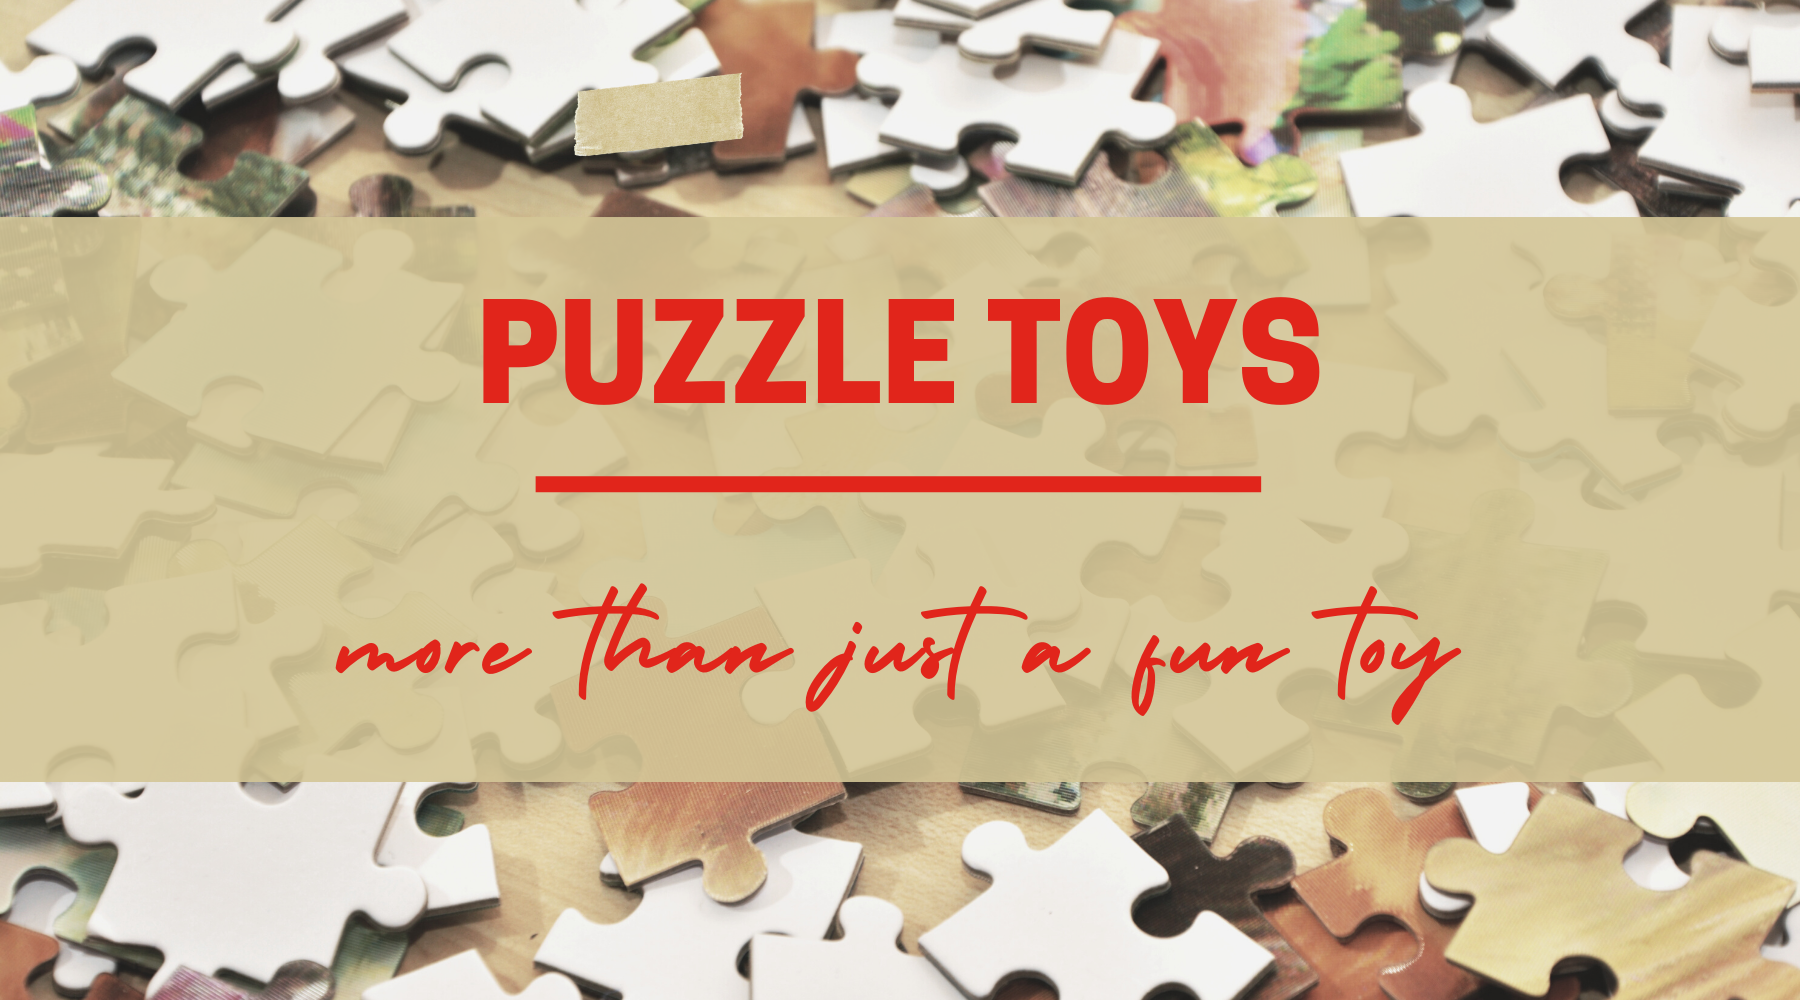 Boosting a Child’s Learning and Mindfulness Through Fun Puzzle Play